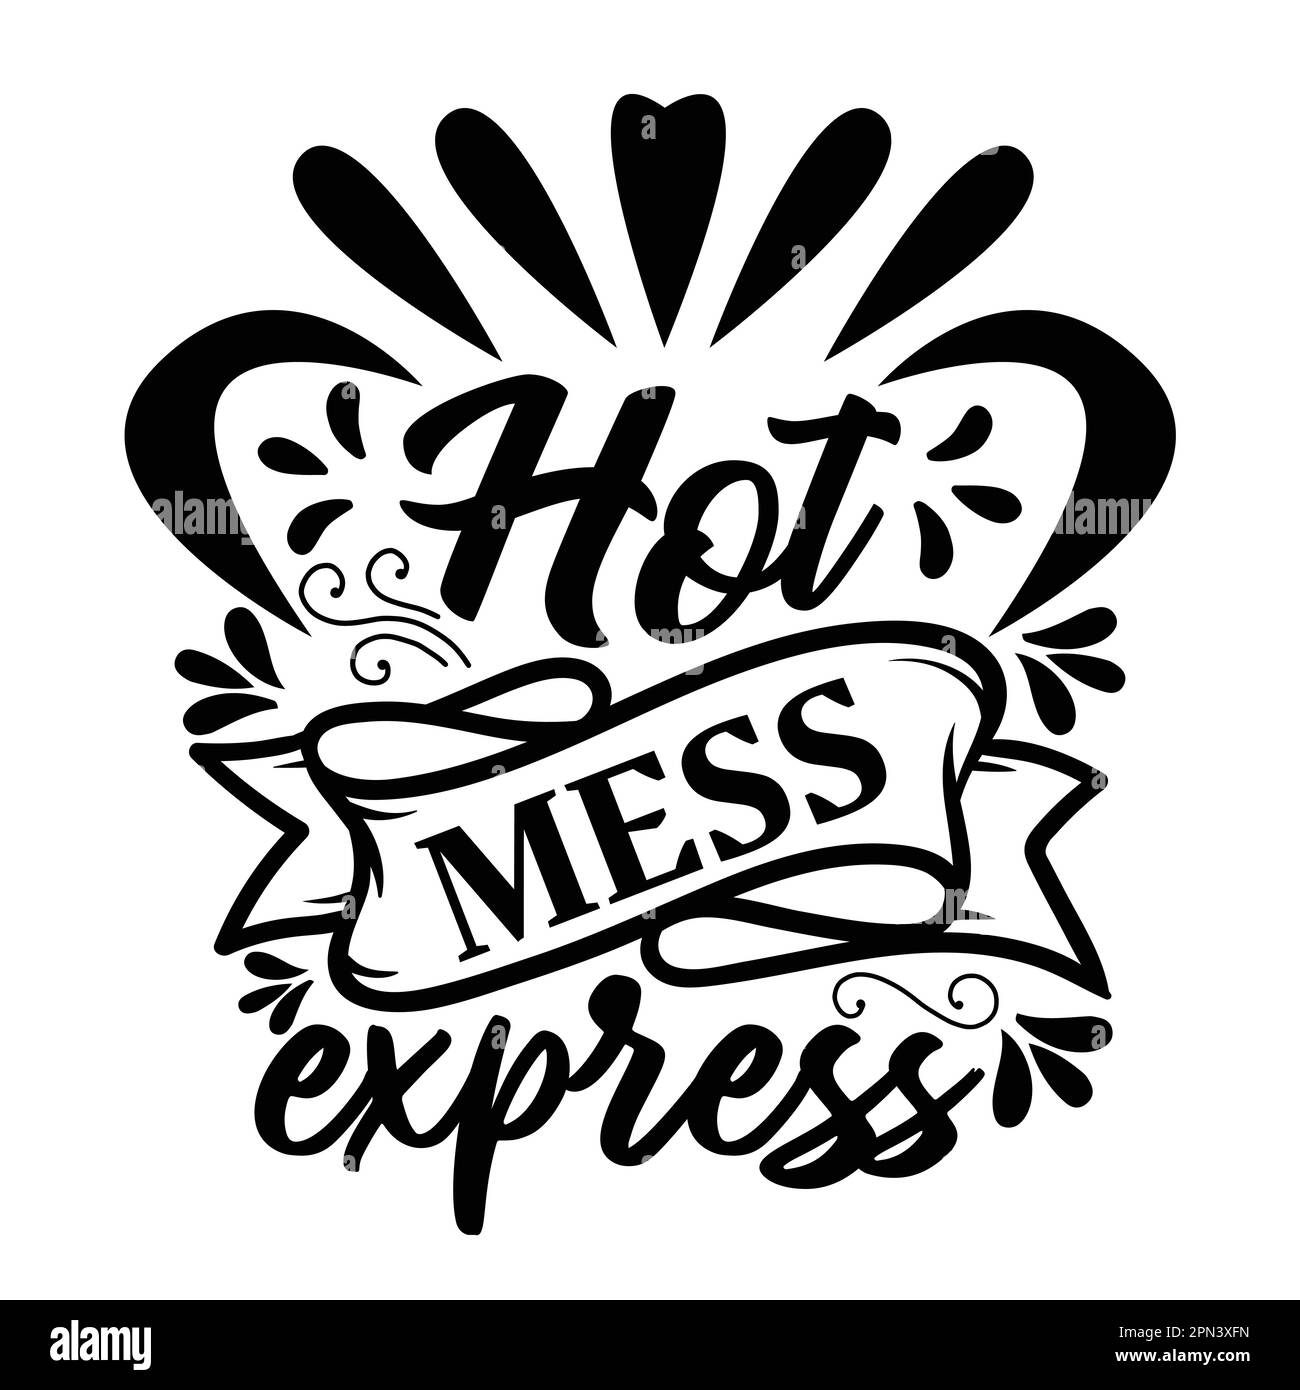 Hot Mess Express, Mother's Day typography shirt design for mother lover mom mommy mama Handmade calligraphy vector illustration Silhouette Stock Vector